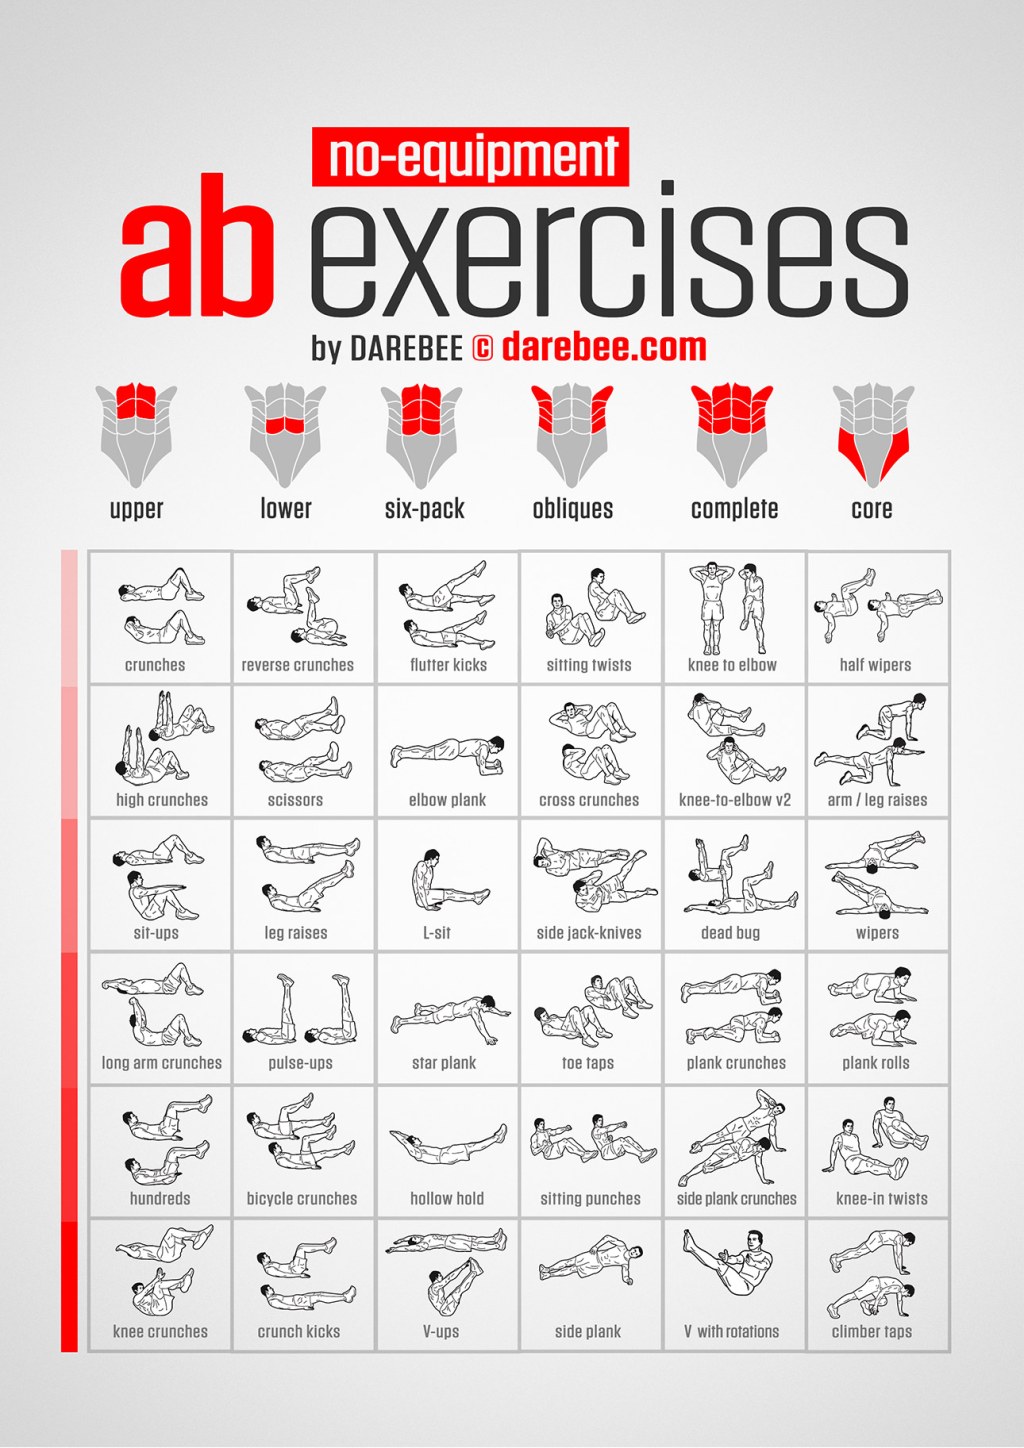 Picture of: Ab exercises that require no equipment, in different intensities